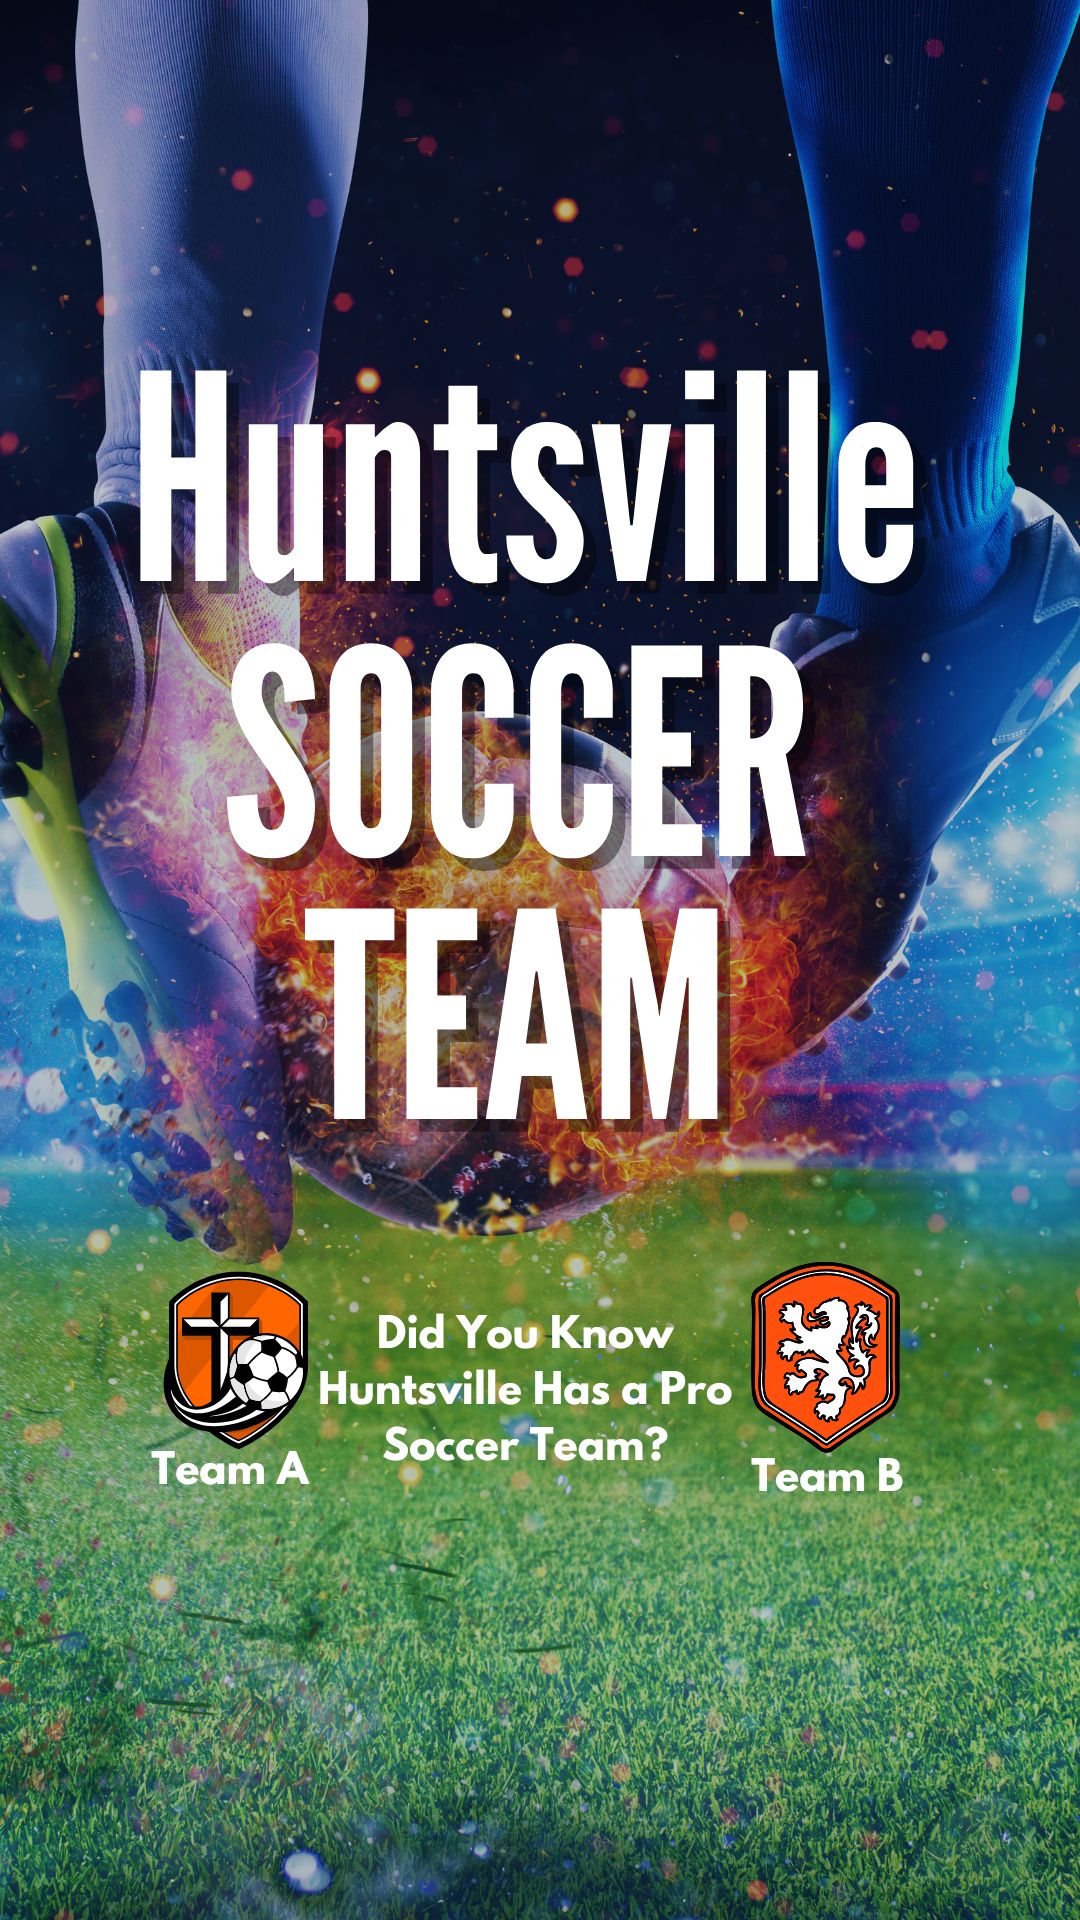 Did You Know Huntsville Has a Pro Soccer Team